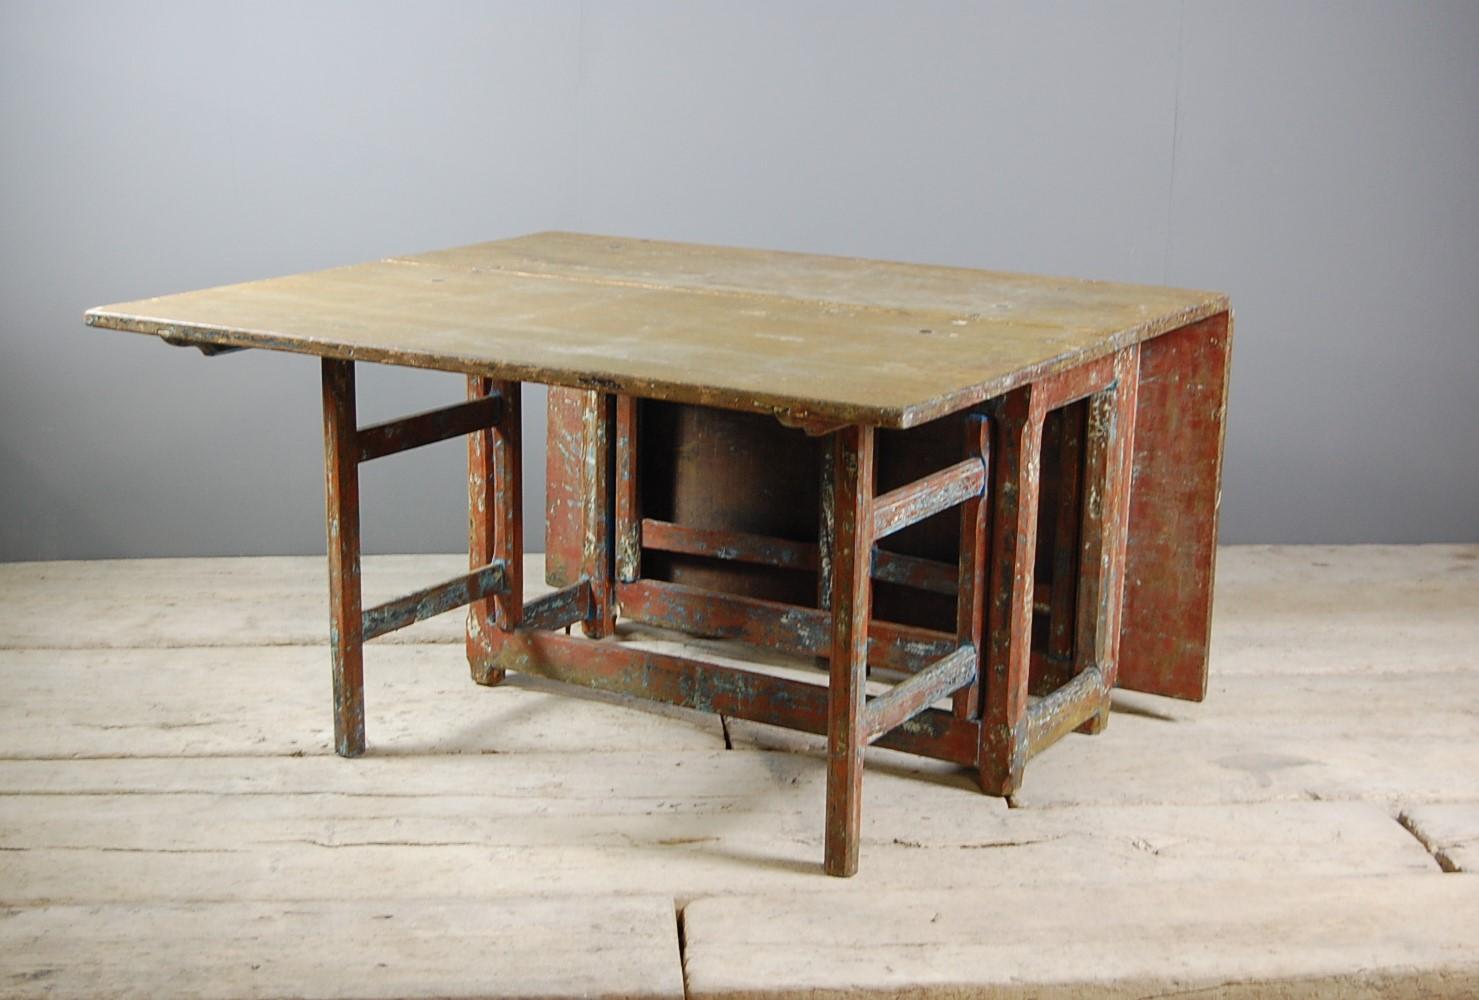 Large Swedish slagbord or drop-leaf table, dry scraped back through multiple layers of old paint. Pine construction. great space saver to be used as a dining table, side or console table with the leaves folded down, Sweden, circa 1820.